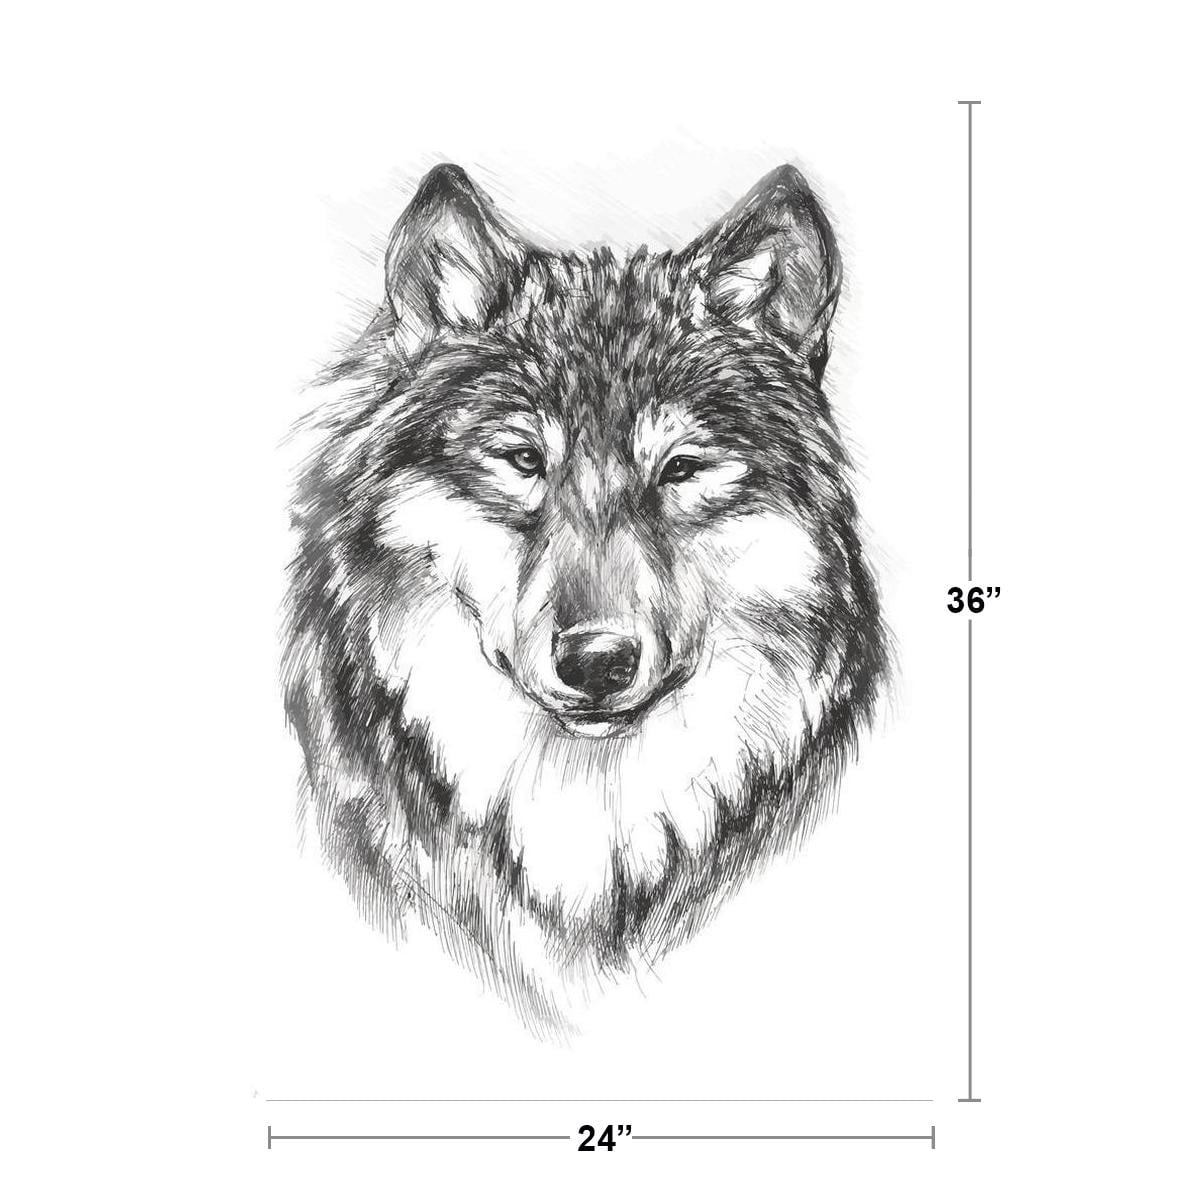 Abstract wolf forest sketch design